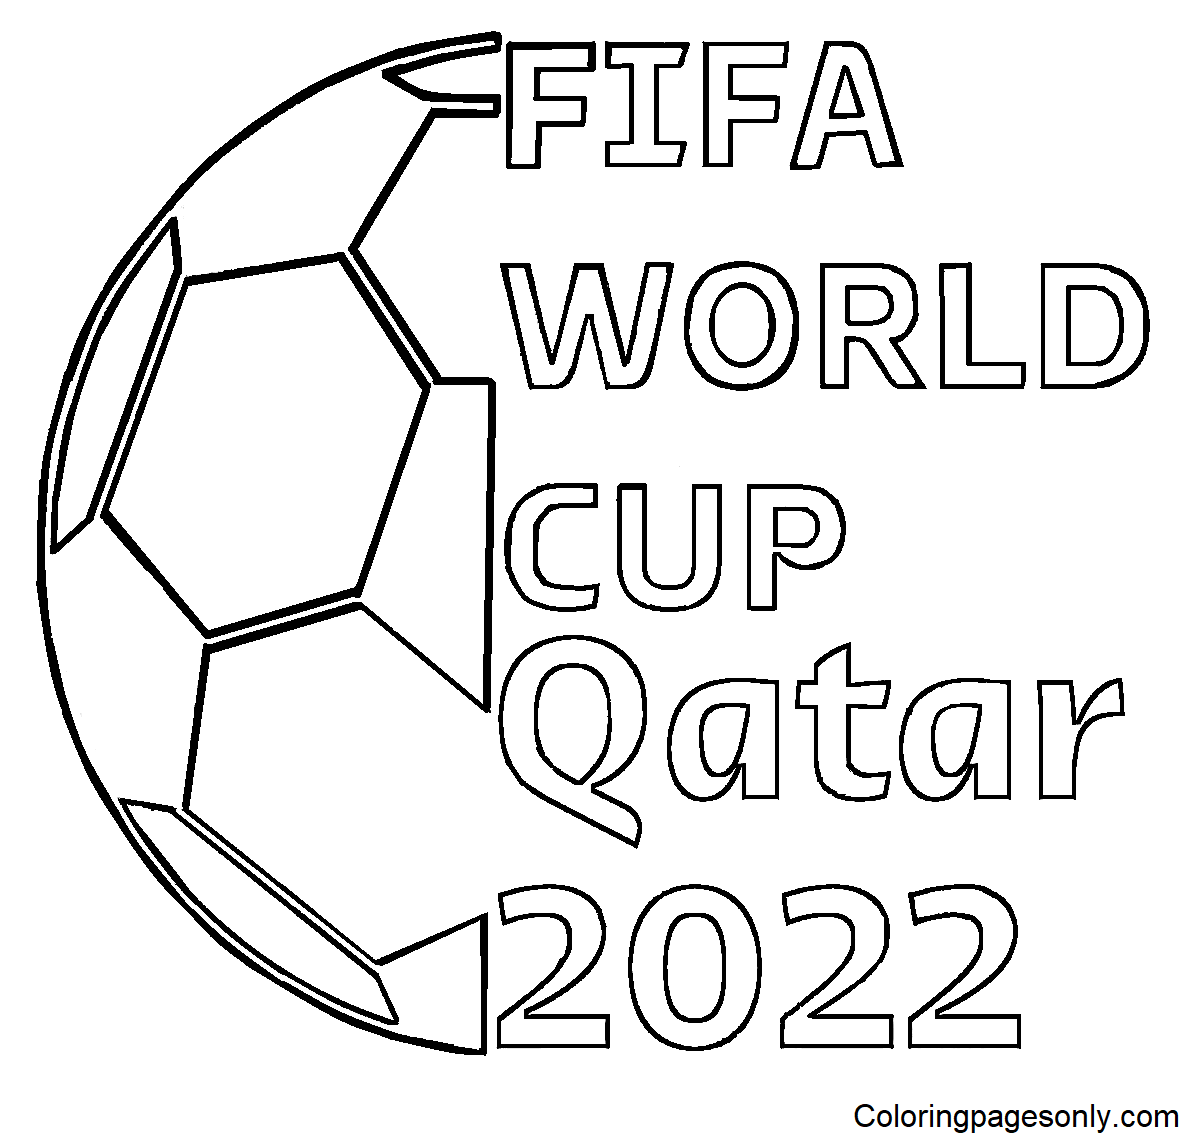 FIFA World Cup Qatar 2022 Coloring Pages